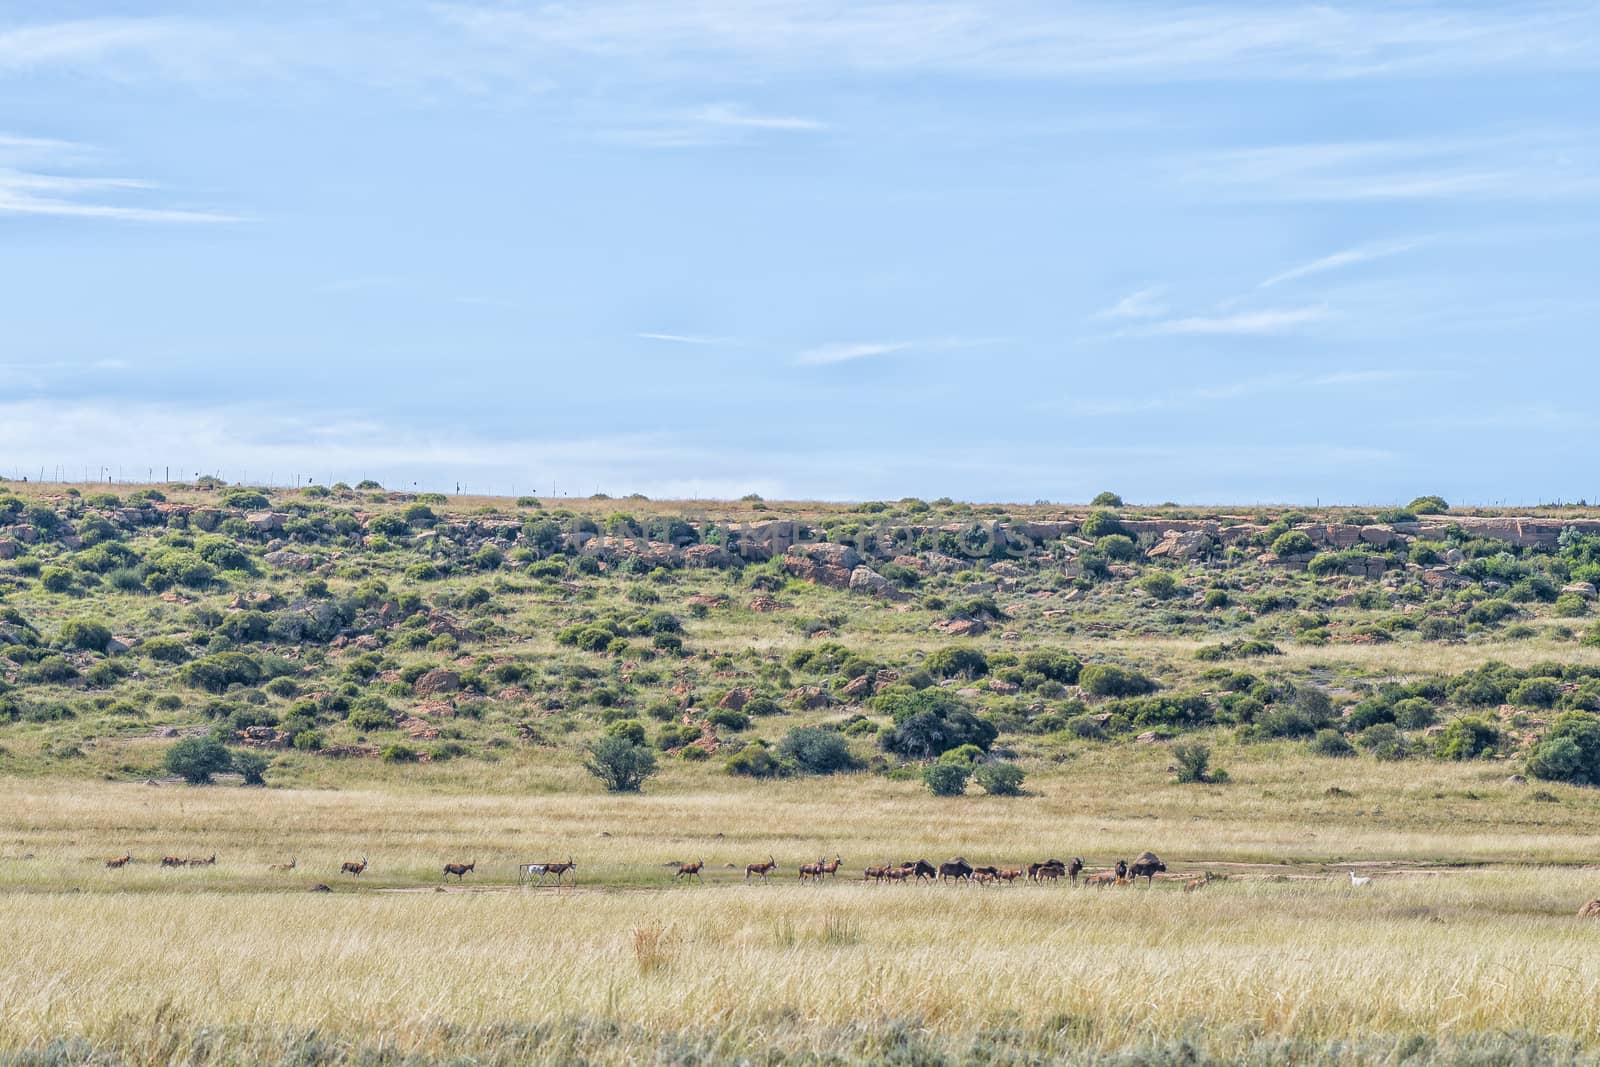 Black wildebeest and red hartebeest on the Eland Hiking Trail by dpreezg